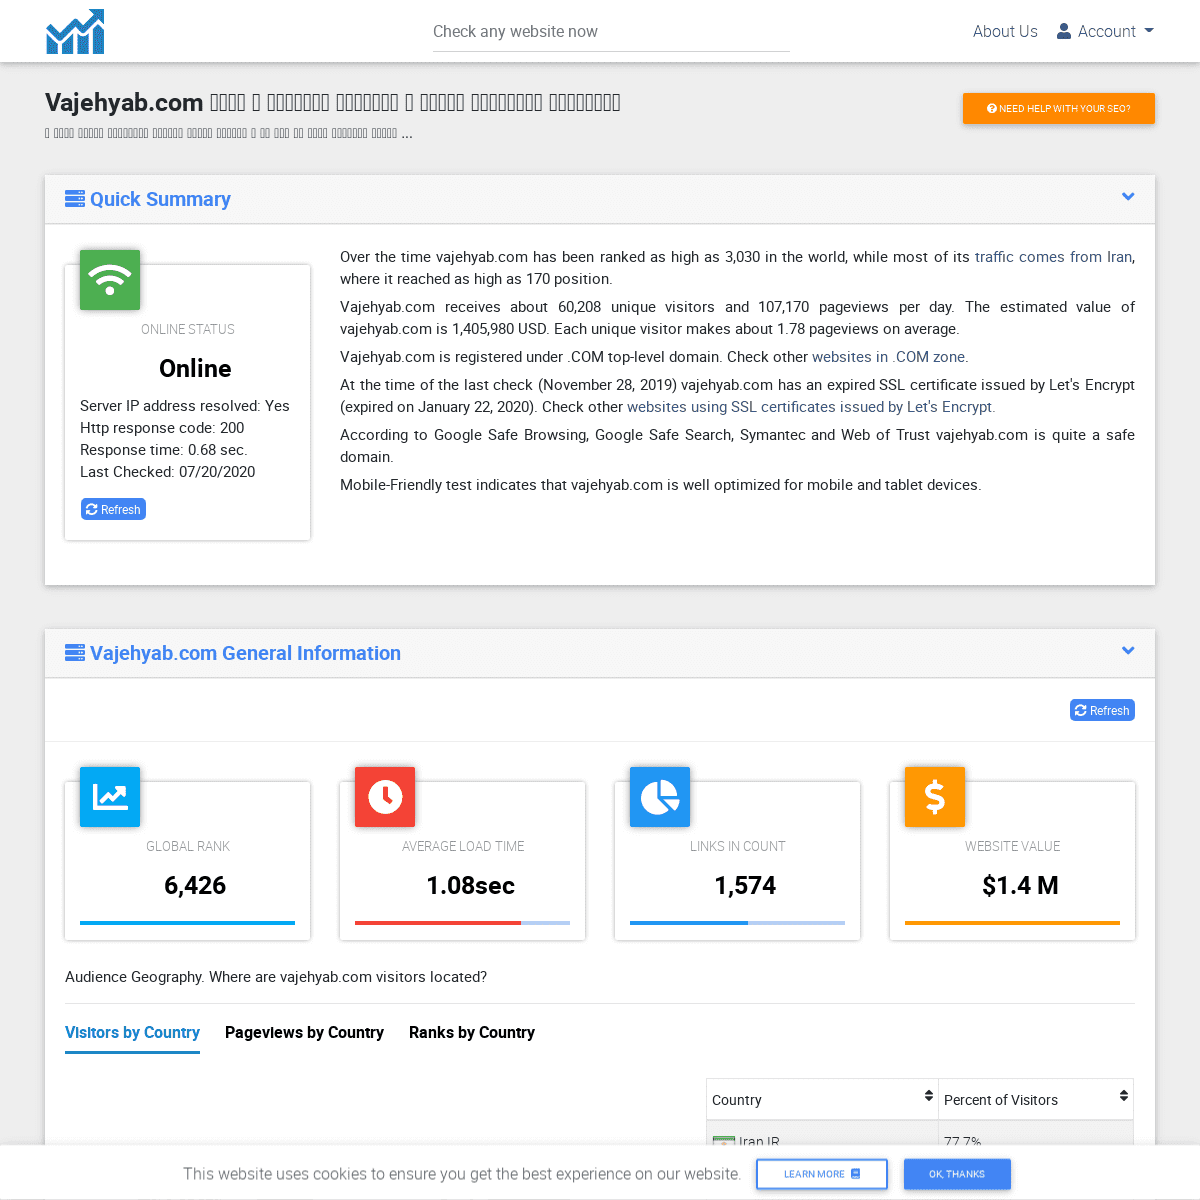 A complete backup of https://webchart.org/site/vajehyab.com